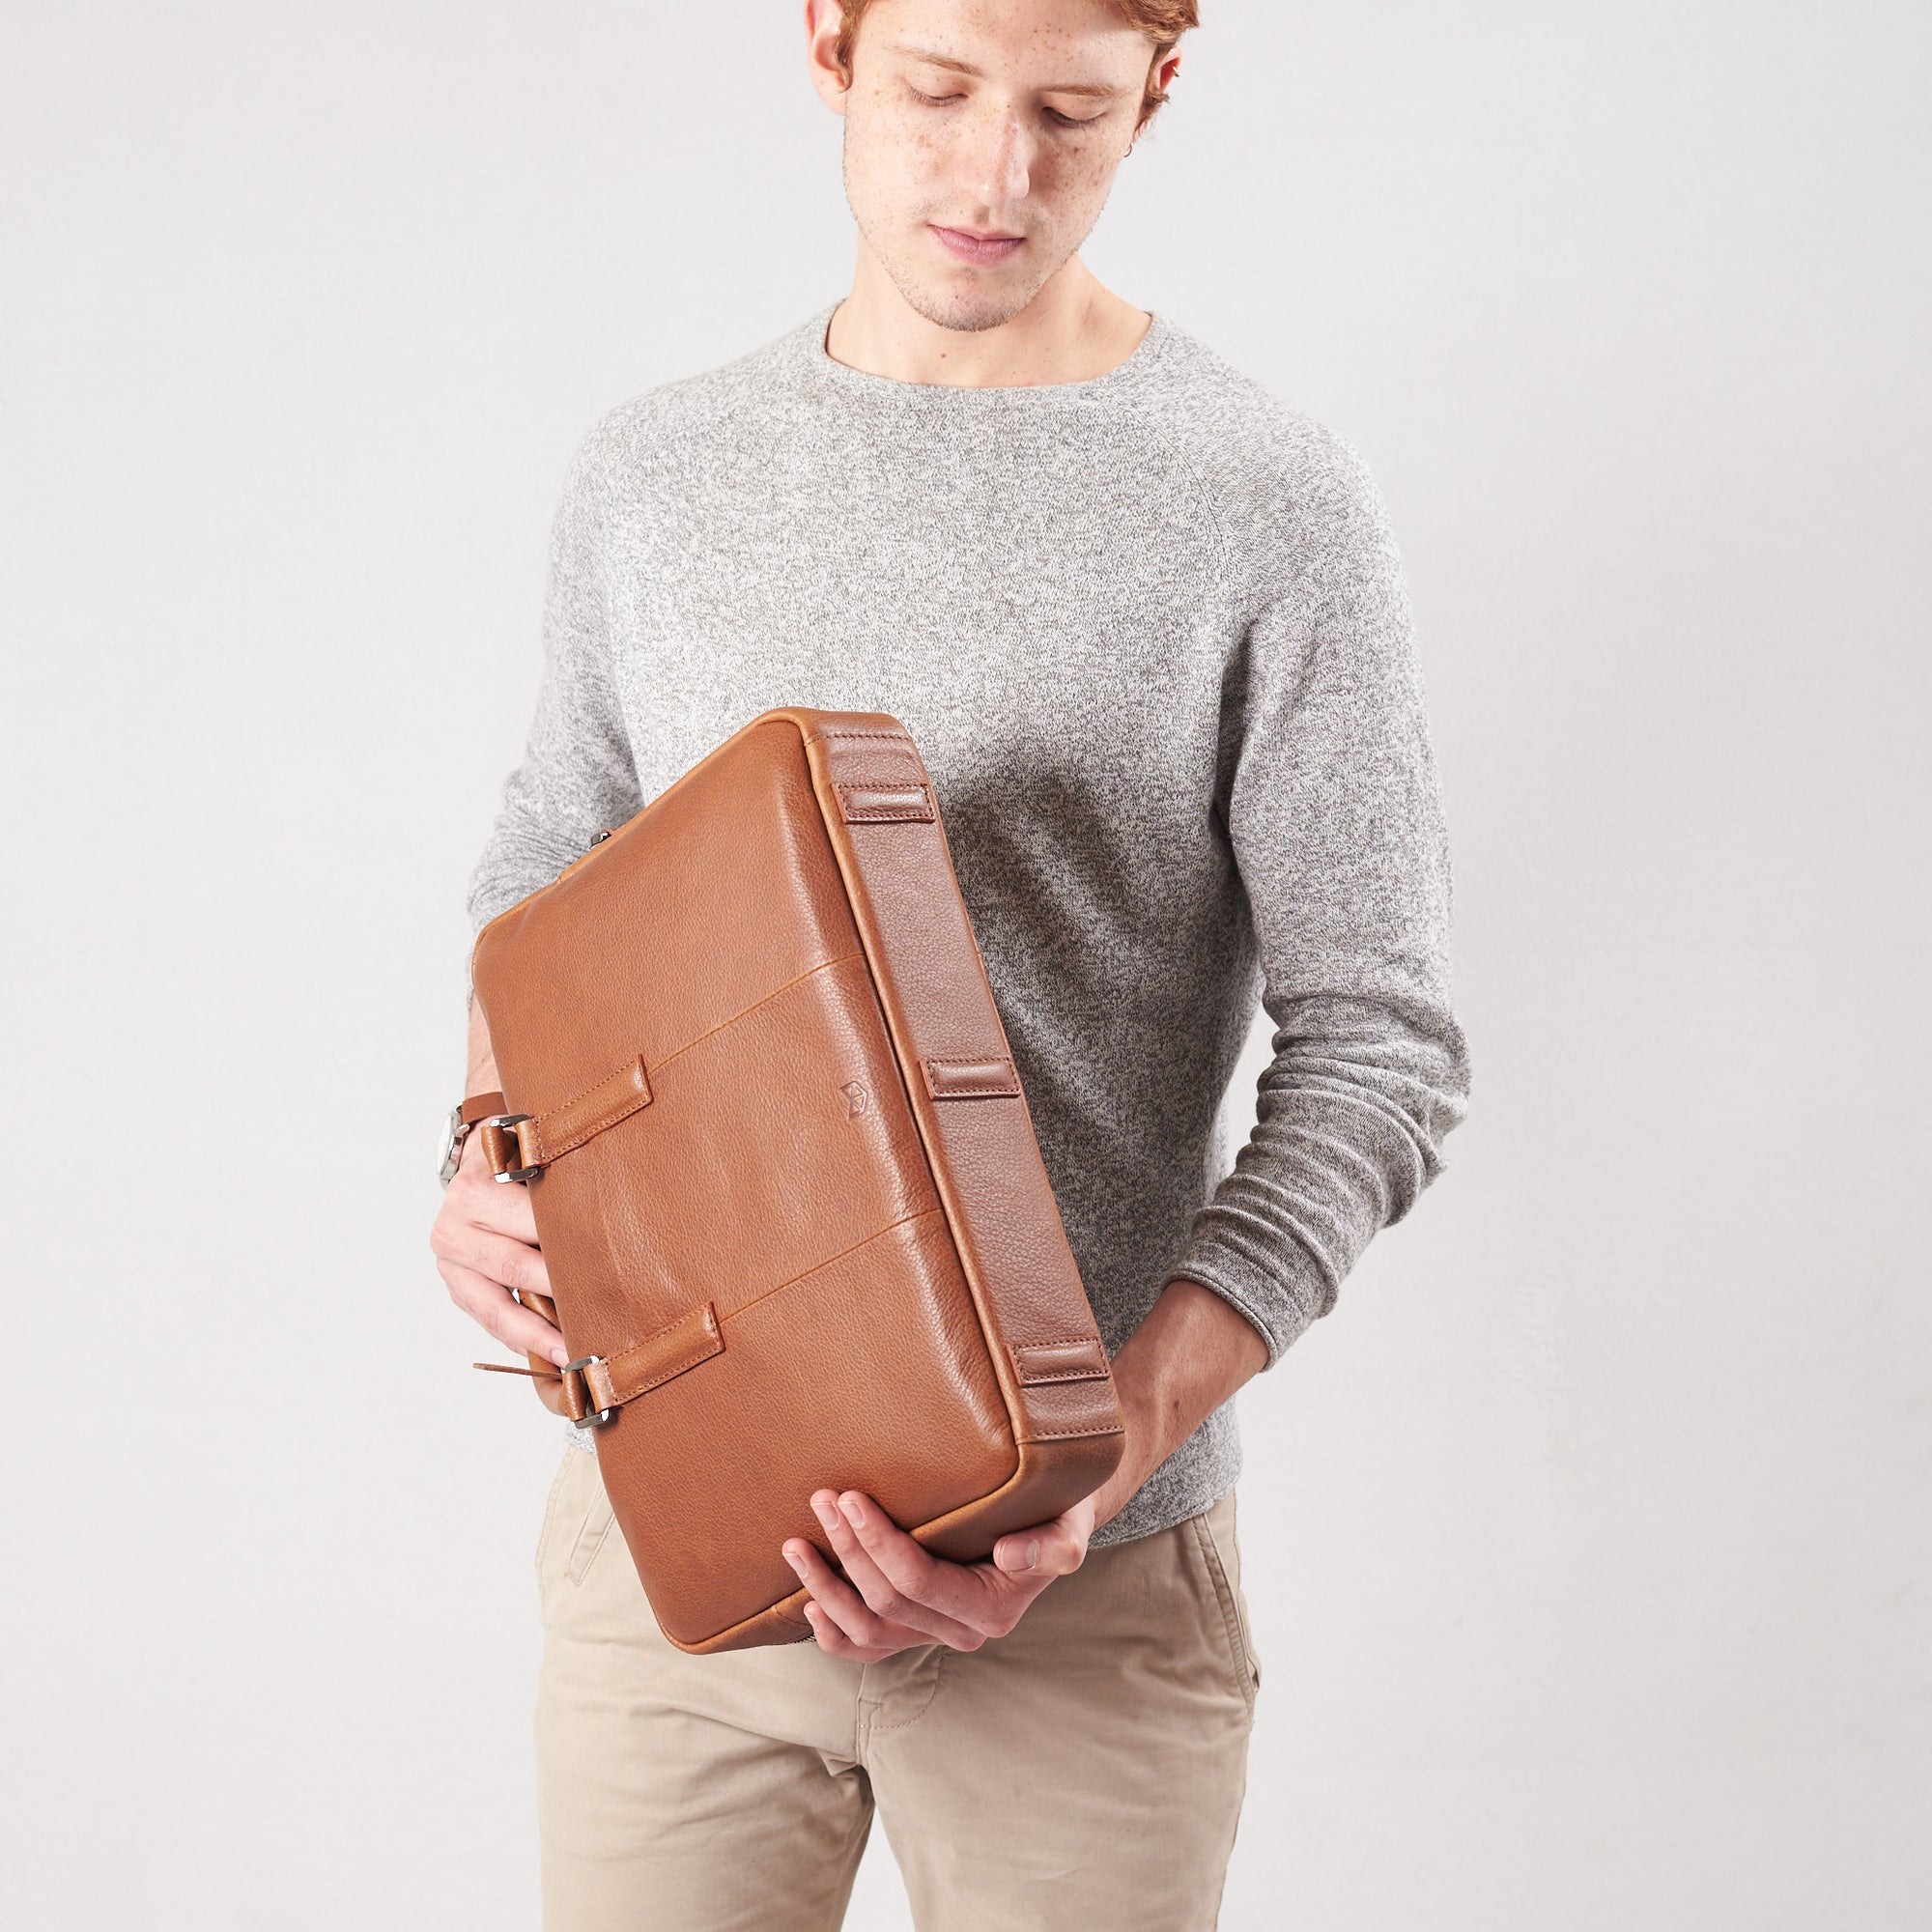 Style detail bag bottom feet hold. Tan leather briefcase laptop bag for men. Gazeli laptop briefcase by Capra Leather.